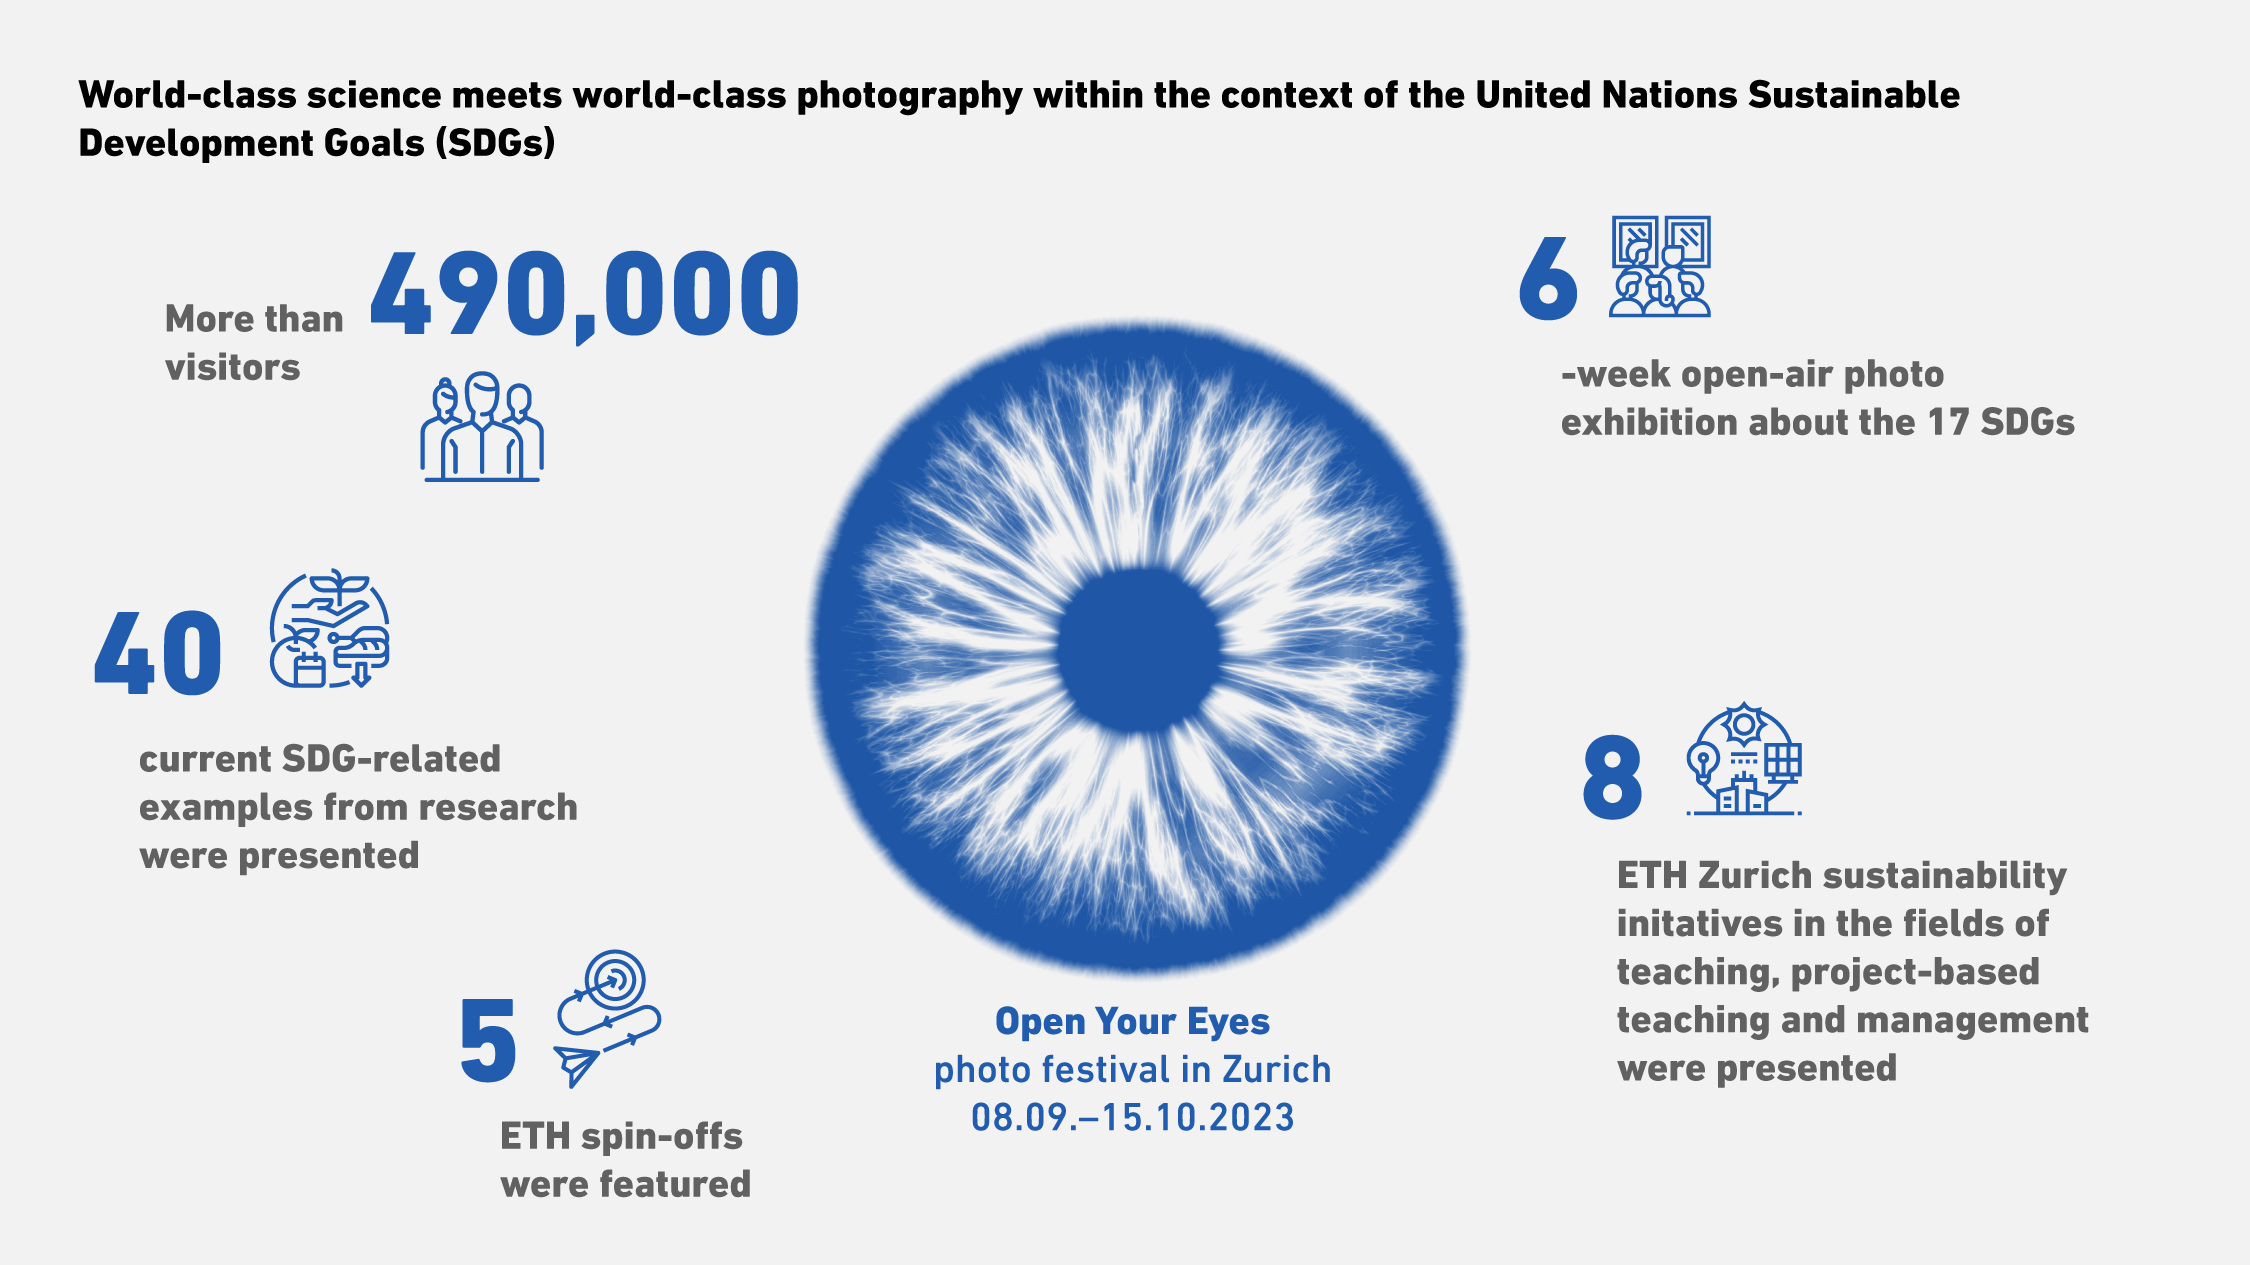 Enlarged view: World-class science meets world-class photography within the context of the United Nations Sustainable Development Goals. Numbers about the Open Your Eyes photo festival in Zurich.